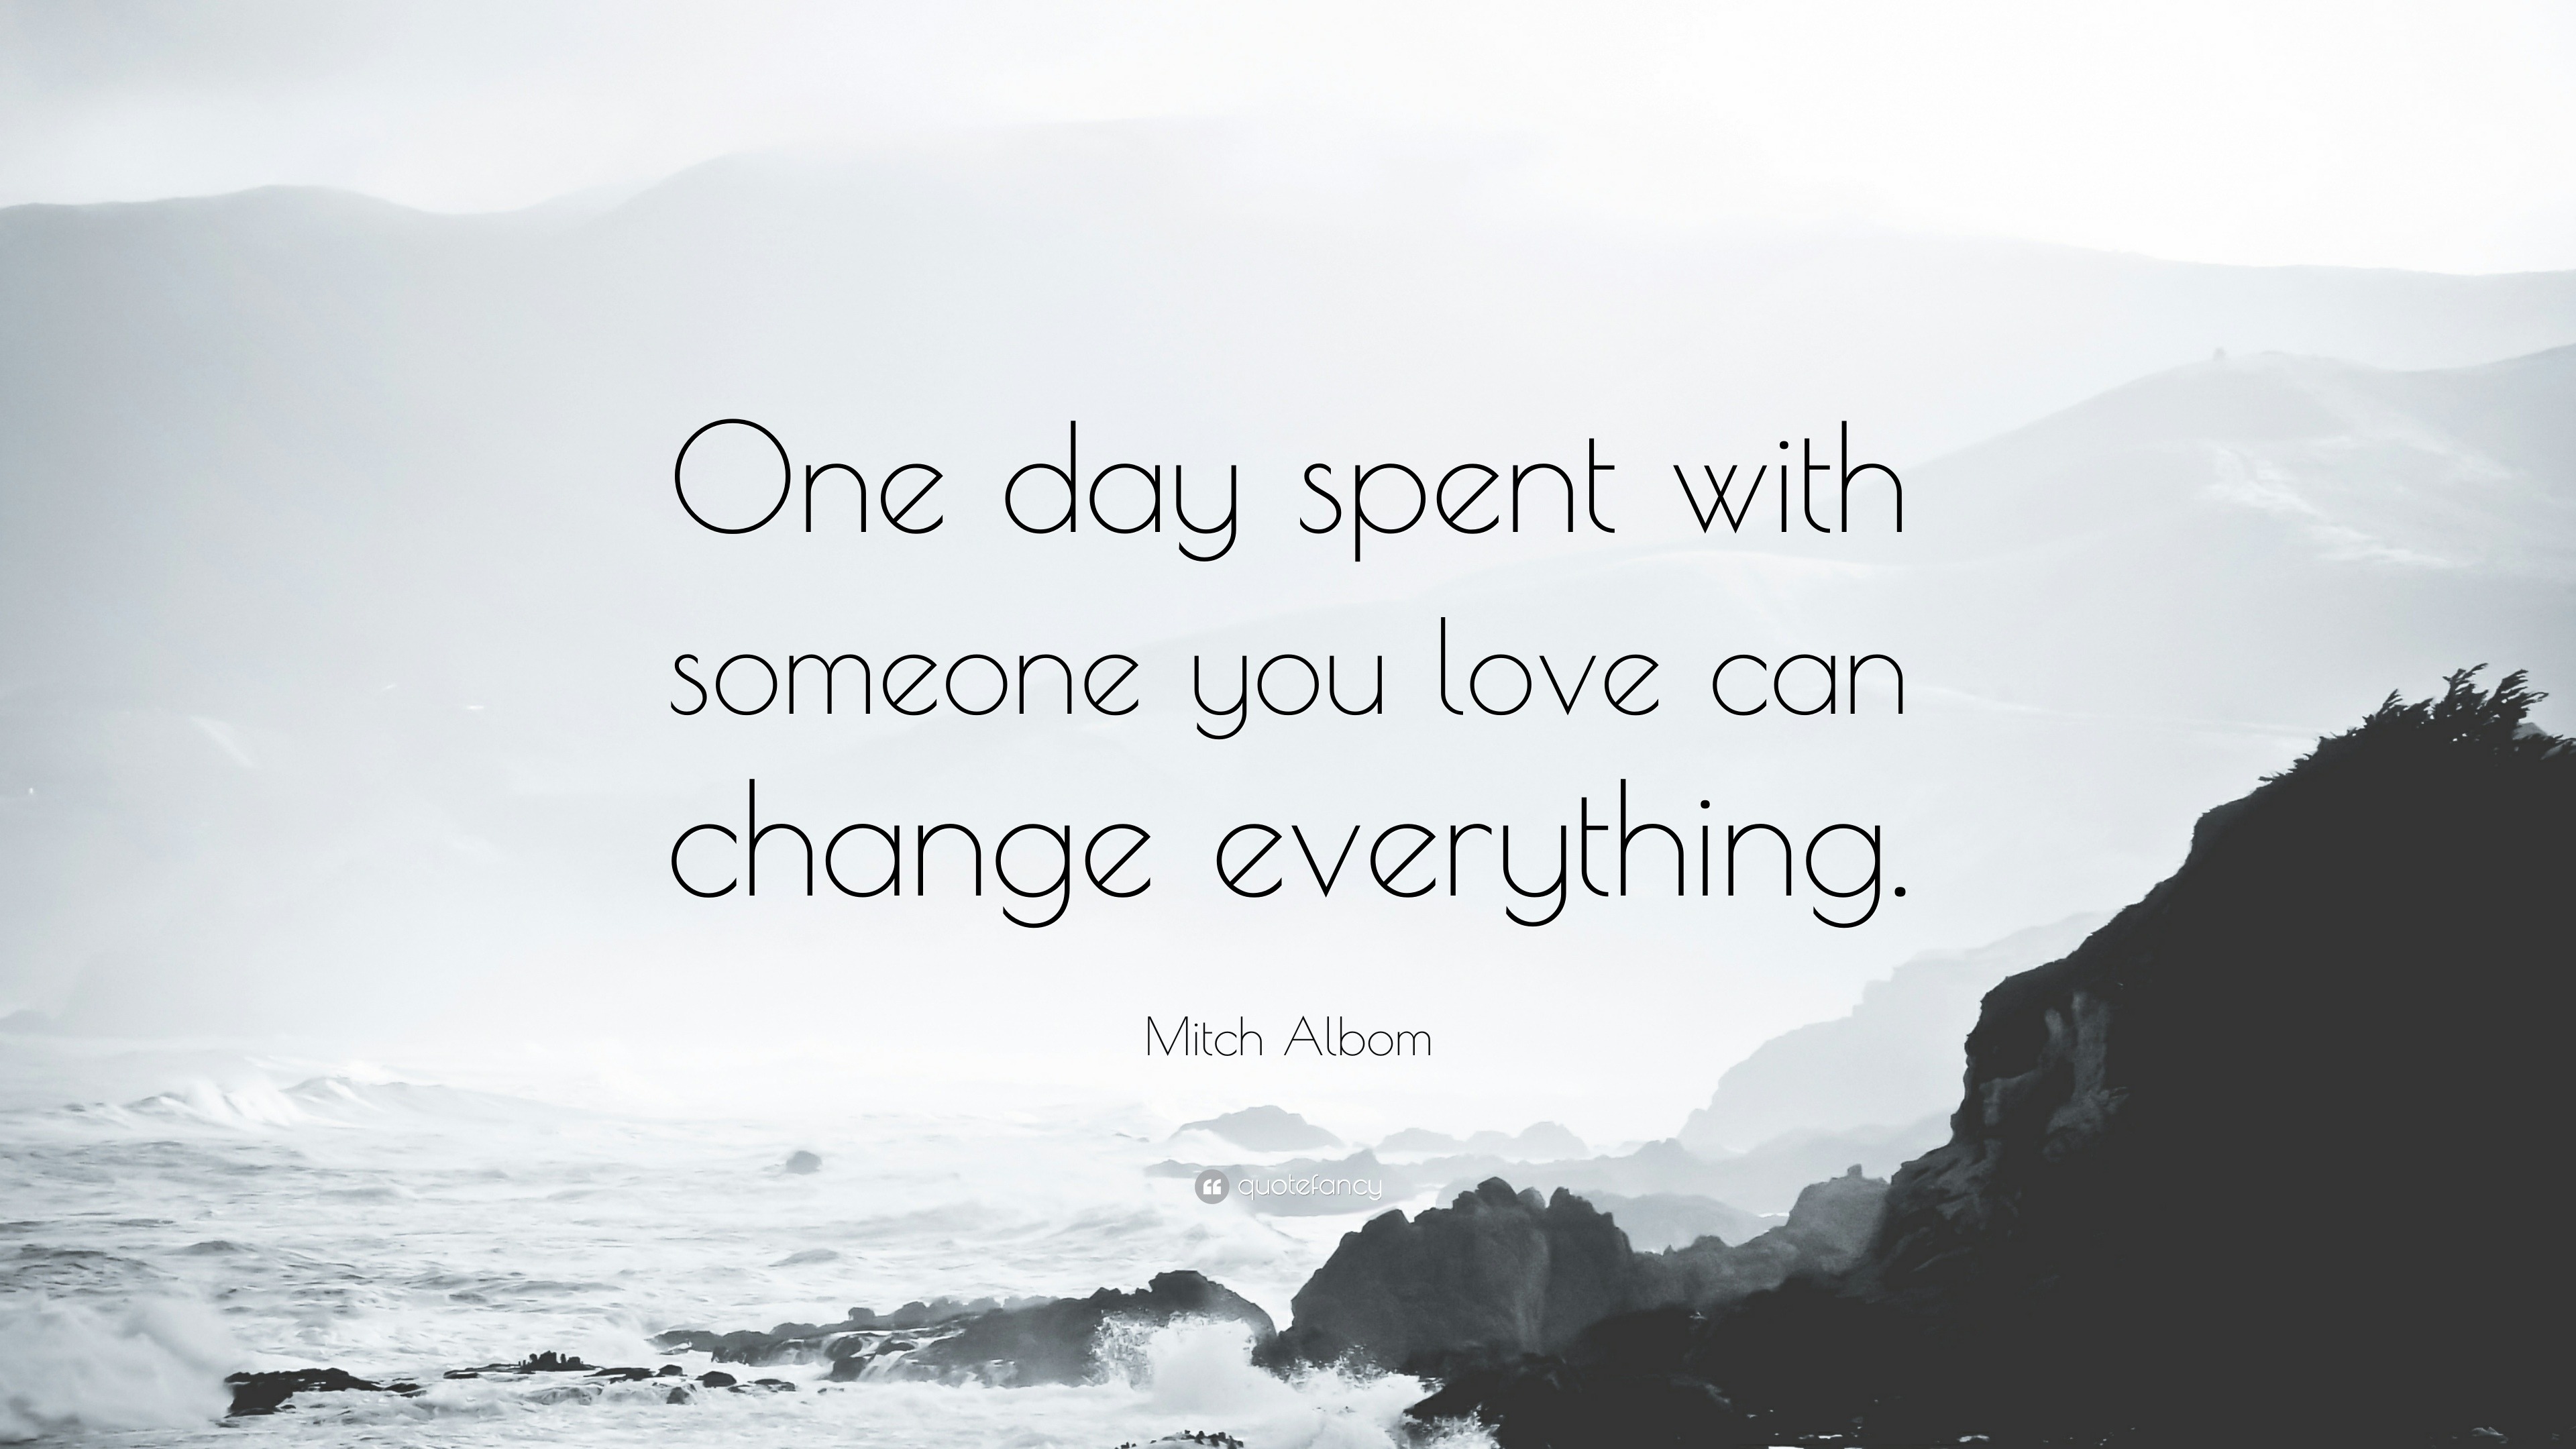 Mitch Albom Quote “ e day spent with someone you love can change everything